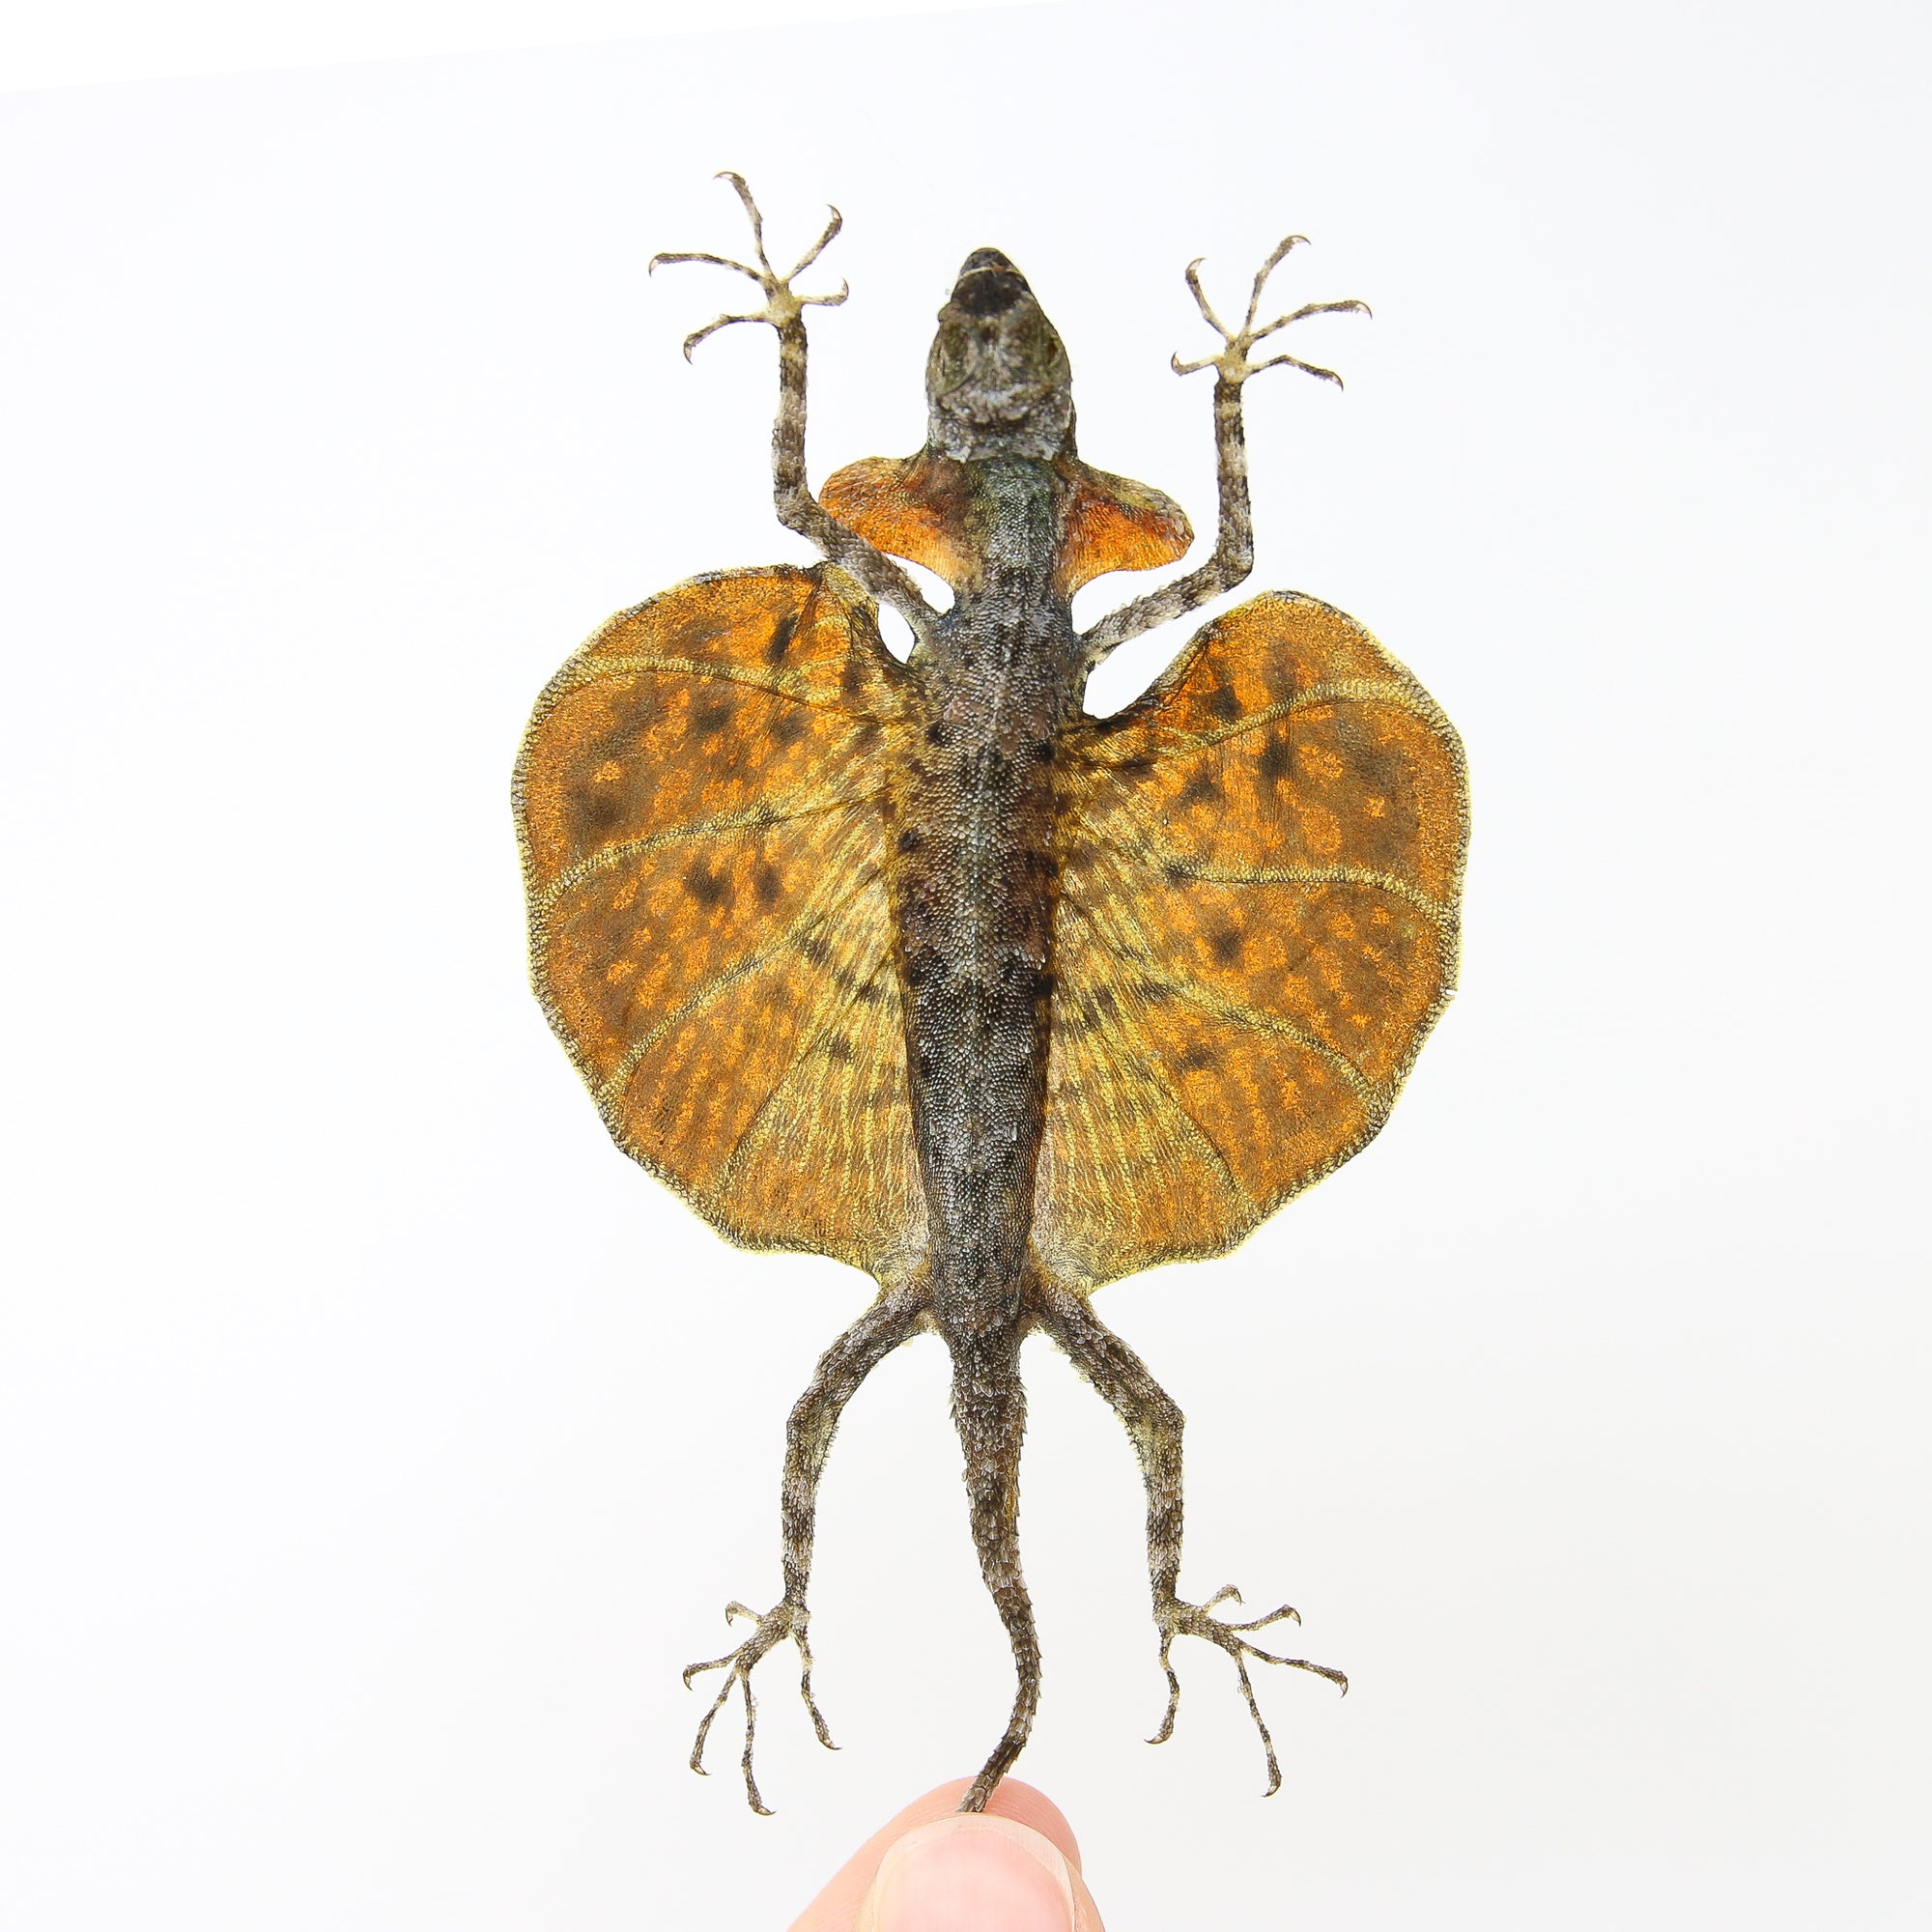 TWO (2) PAIR of Draco Flying Lizards (Draco haematopogon) | A1 Spread Specimens 20cm | Dry-Preserved Taxidermy